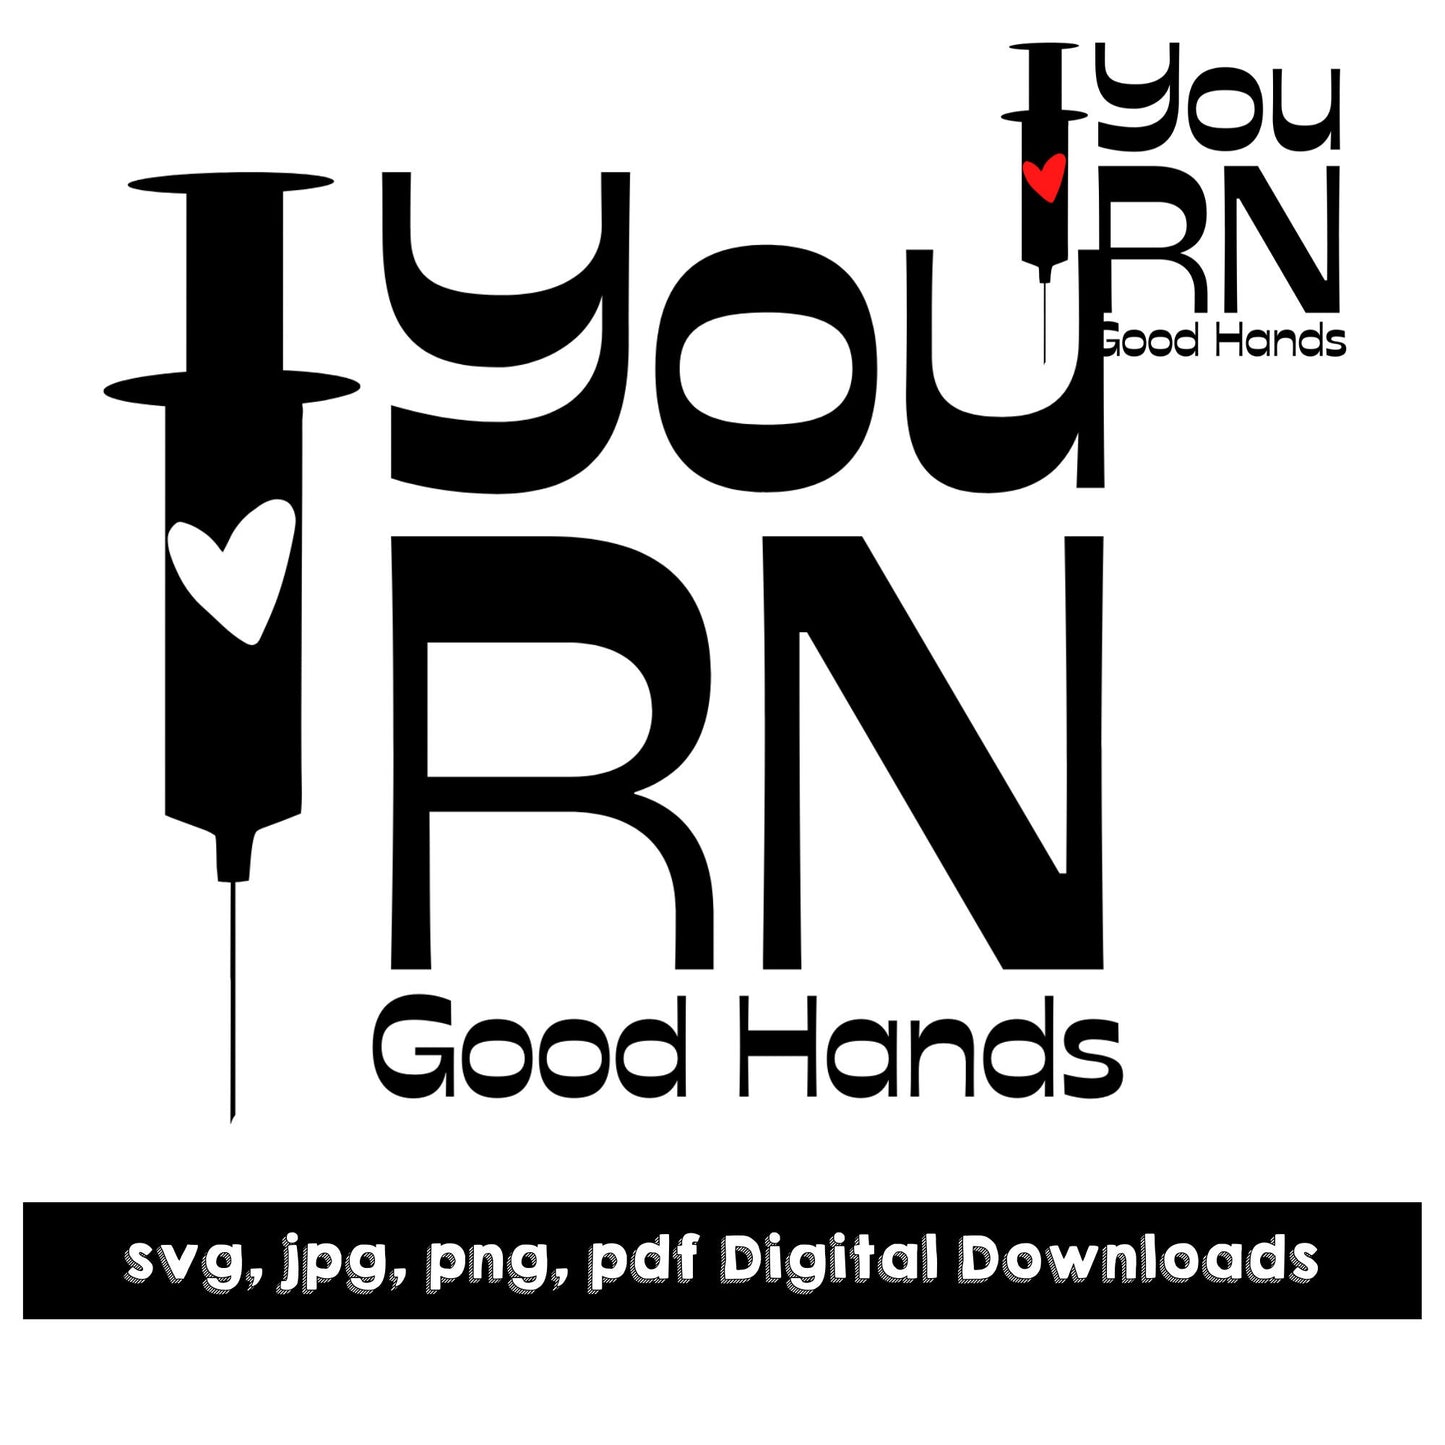 You RN Good Hands